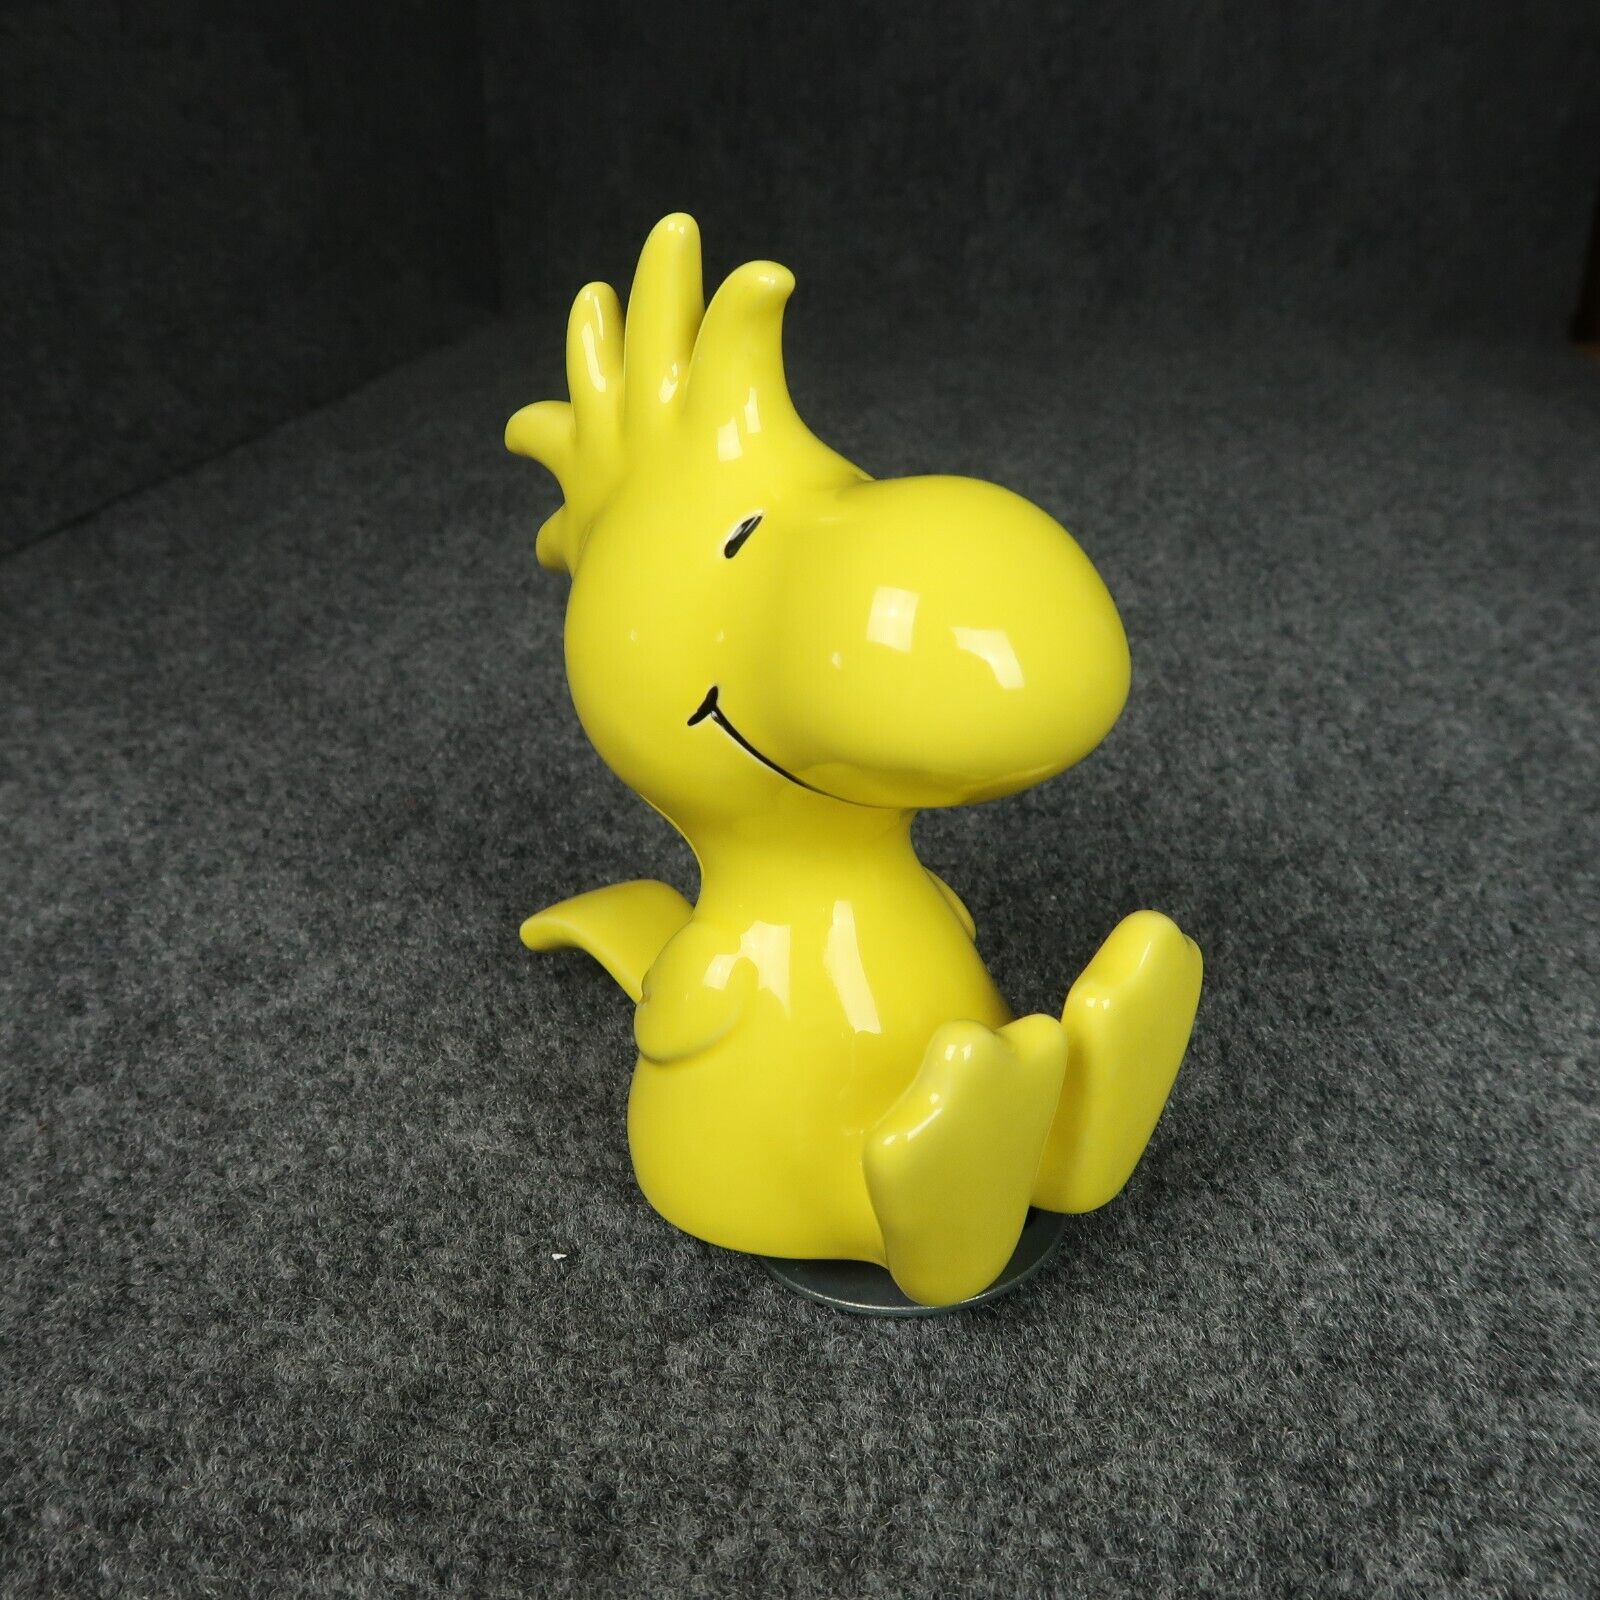 Vintage Schmid Peanuts Woodstock Ceramic Music Box 1972 Just The Way You Are